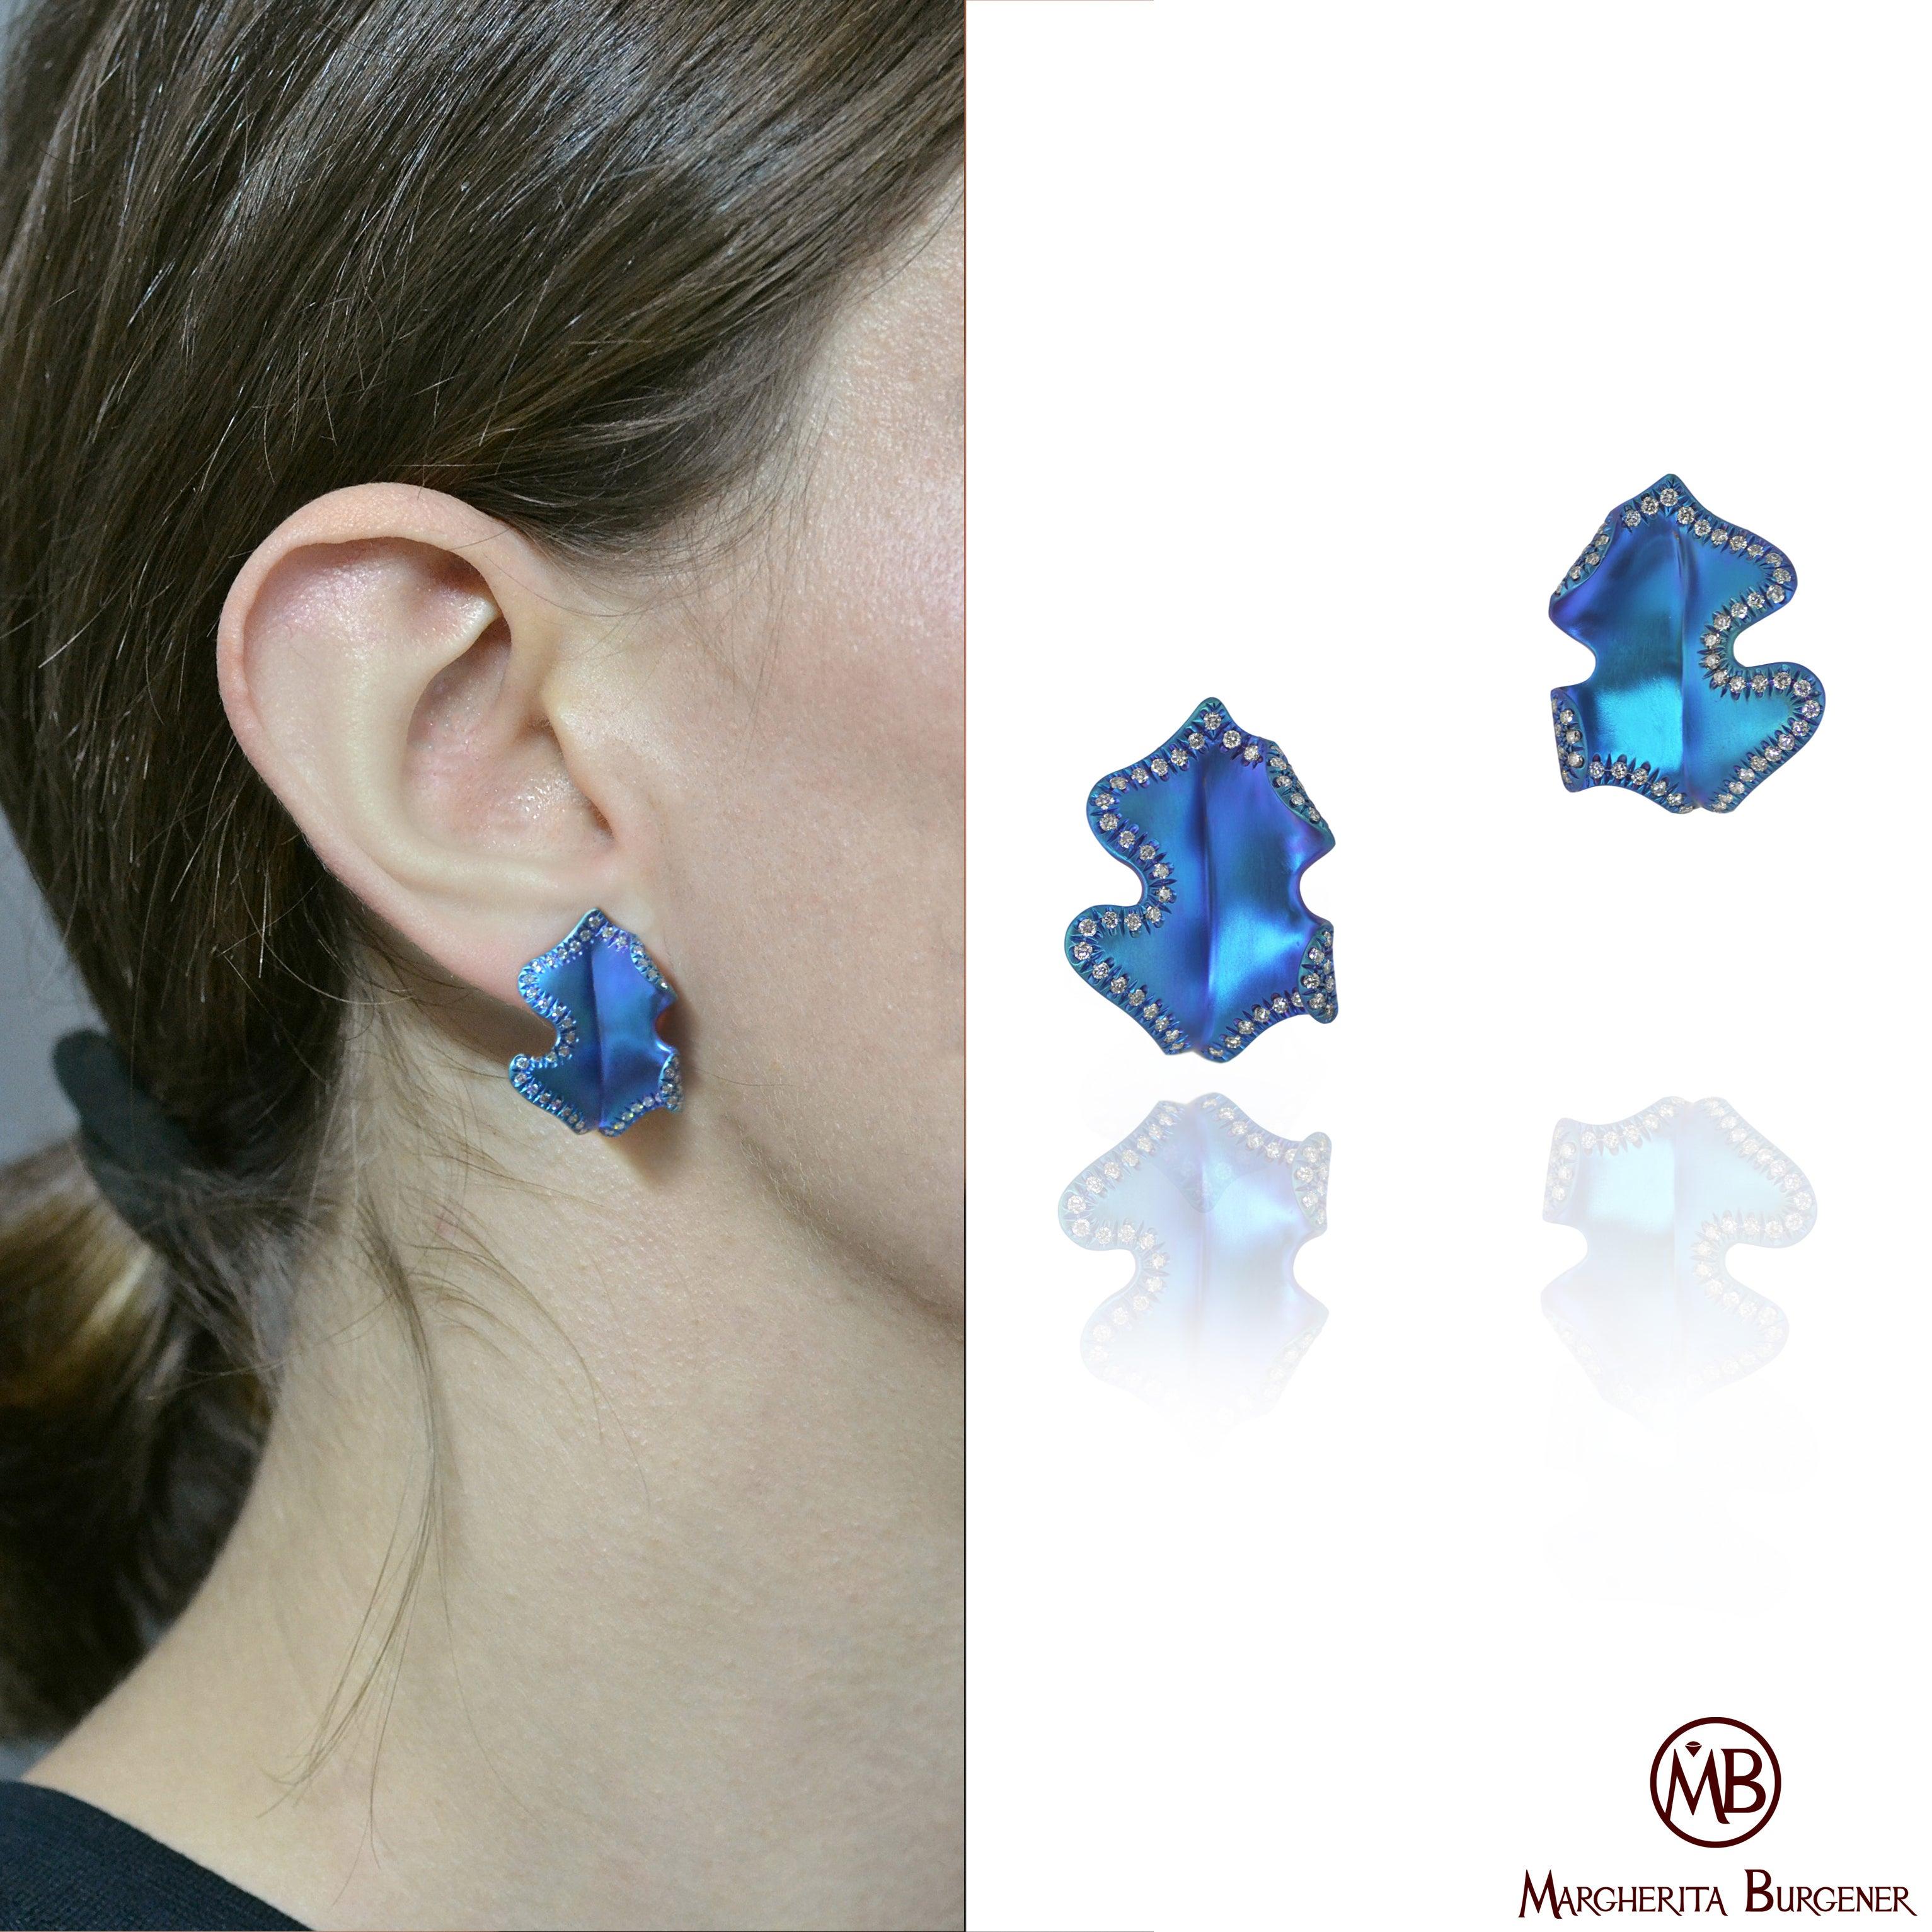 These very original 'Ghiande' earrings are handmade, on order, in Margherita Burgener family workshop, Italy.
Handmade in titanium, they feature diamonds and anodized teal color.
On request you can have them in yellow, pink, green.

Titanium
18 KT